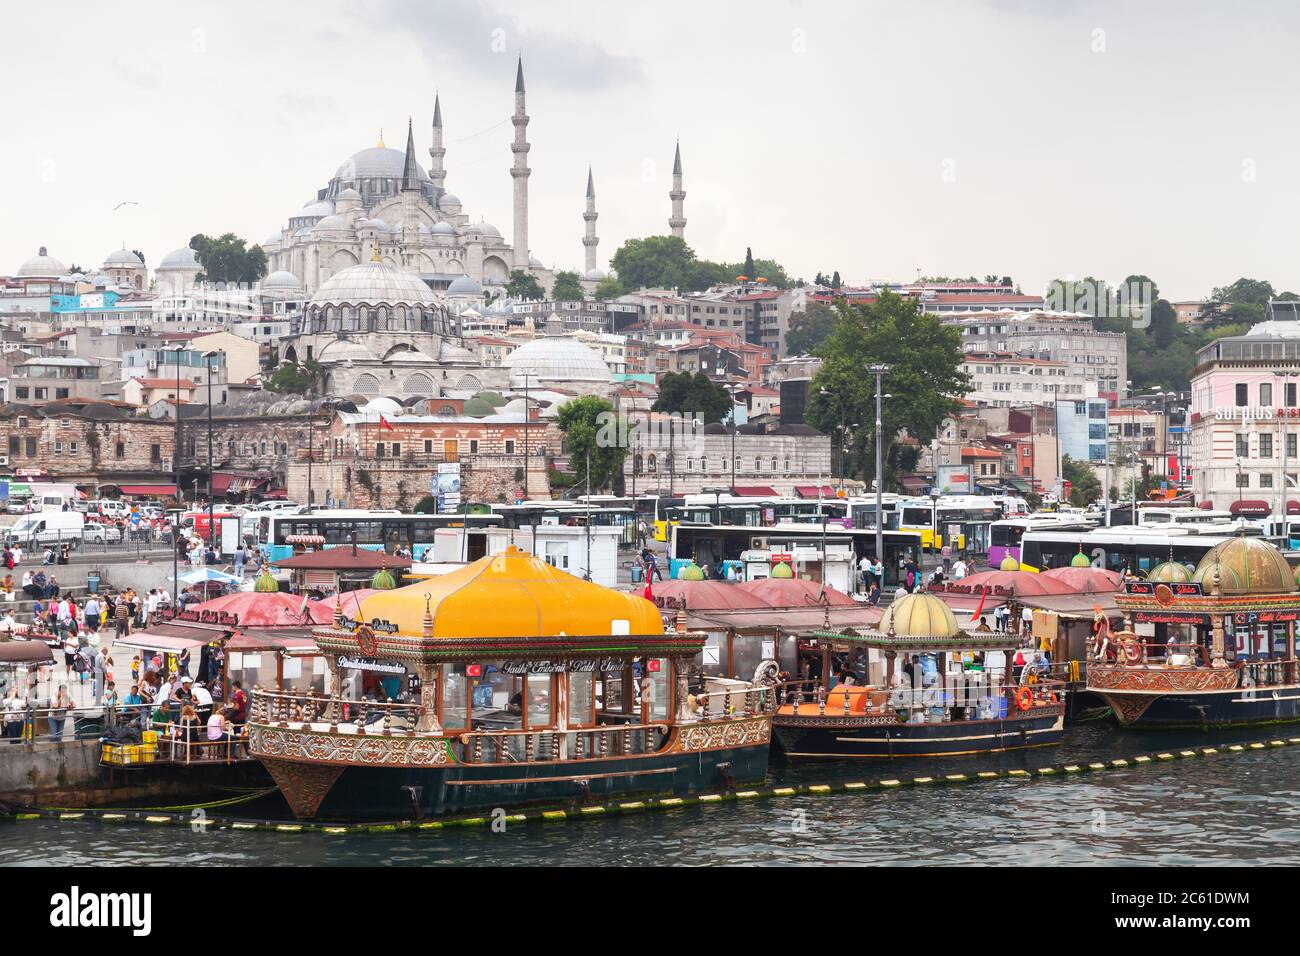 Istanbul, Turkey - June 28, 2016: Istanbul street view, Eminonu former district. Ordinary people are on the coast of Golden Horn, Suleymaniye Mosque i Stock Photo